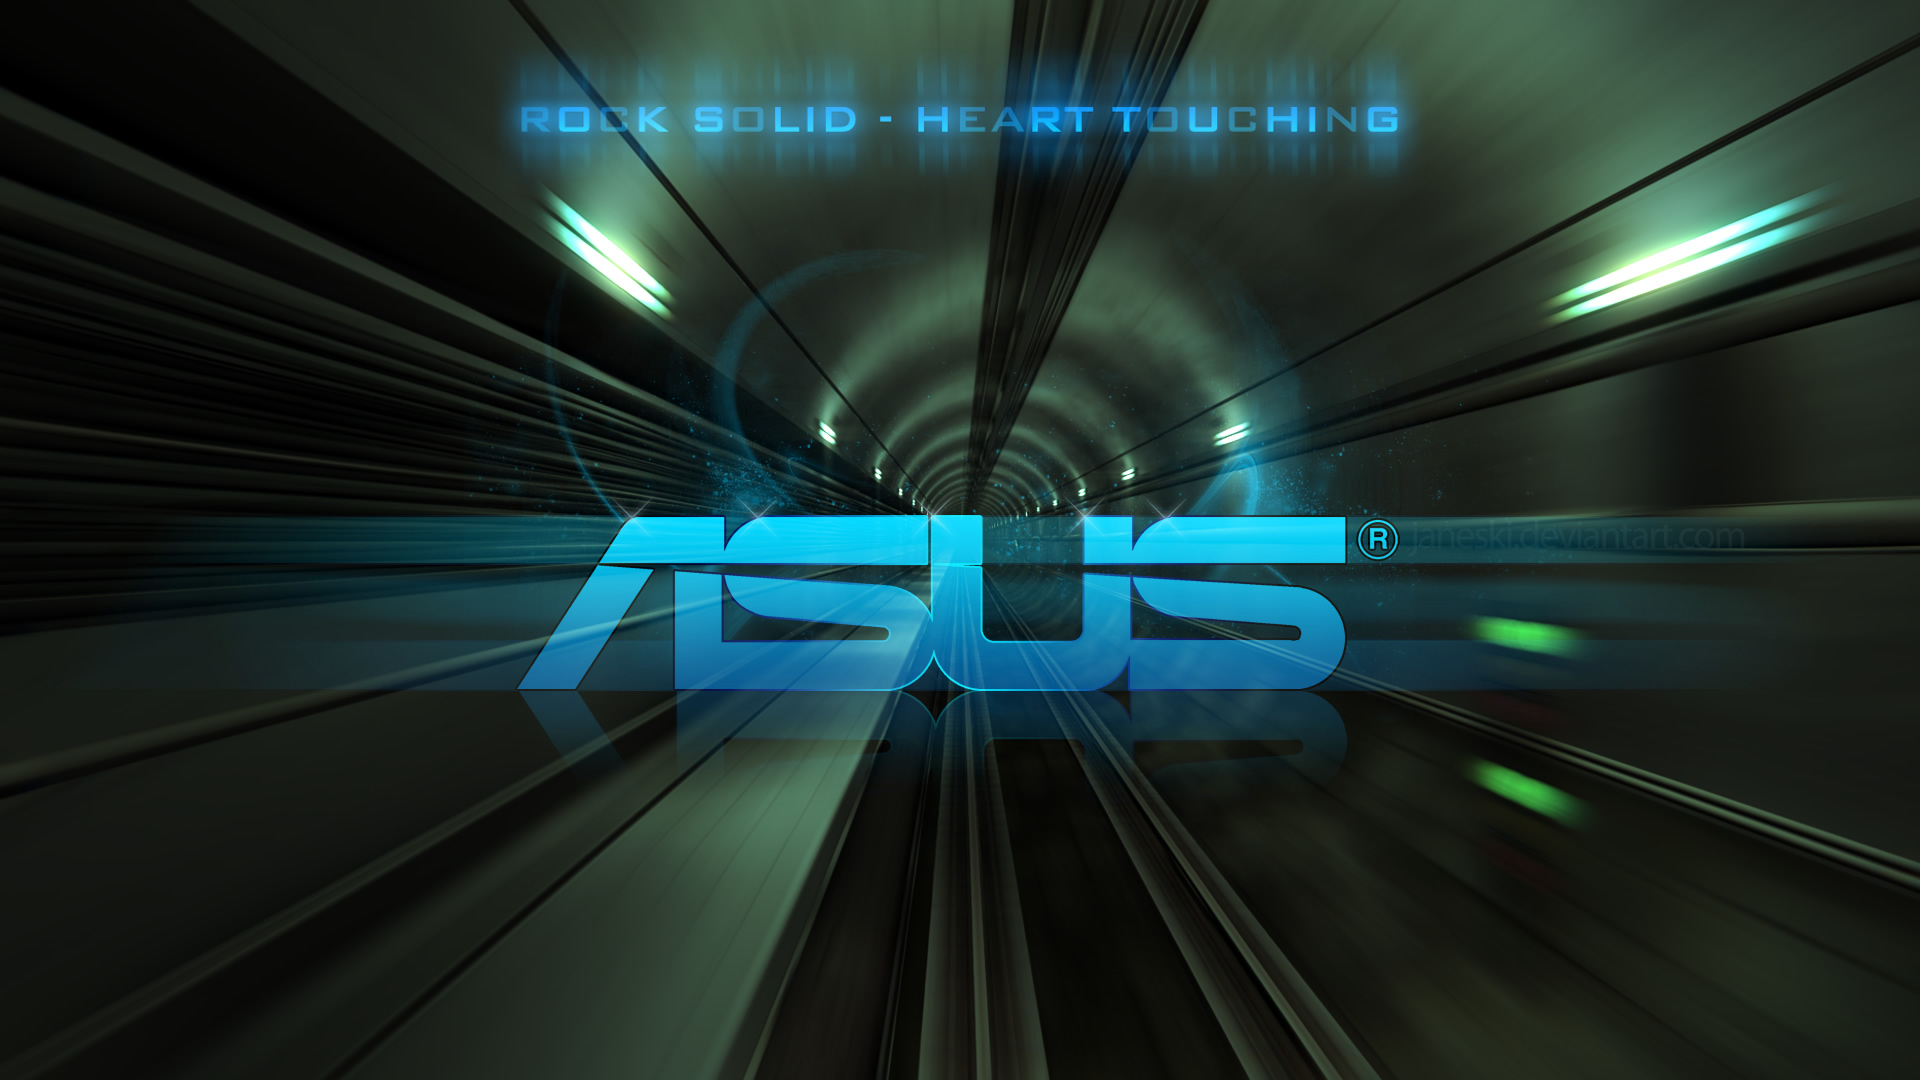 Asus HD Wallpaper | Background Image | 1920x1080 | ID ...